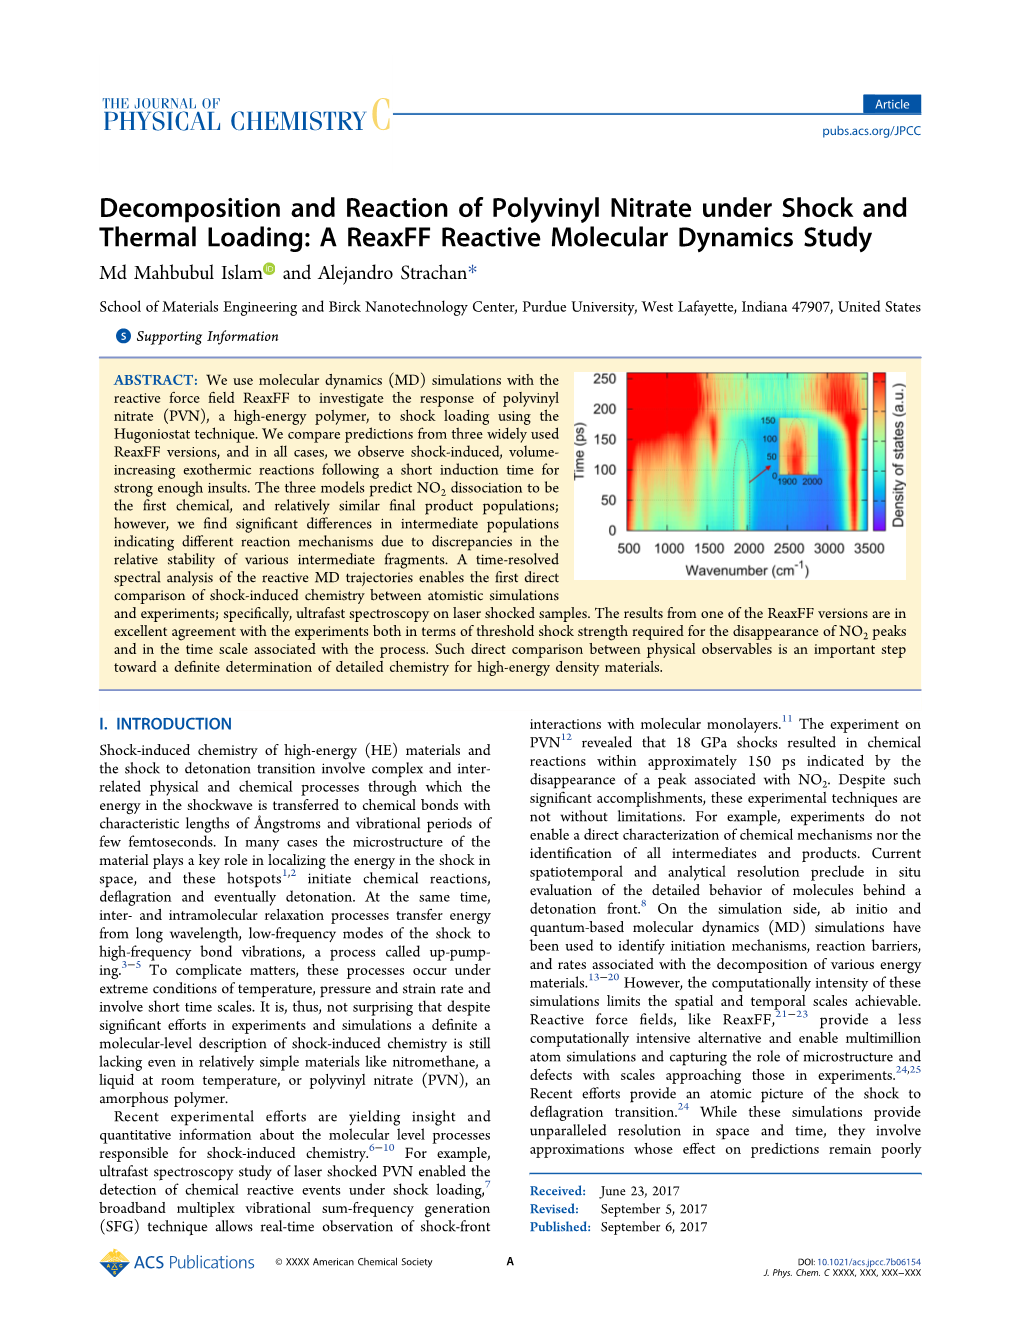 Decomposition and Reaction of Polyvinyl Nitrate Under Shock and Thermal Loading: a Reaxff Reactive Molecular Dynamics Study Md Mahbubul Islam and Alejandro Strachan*